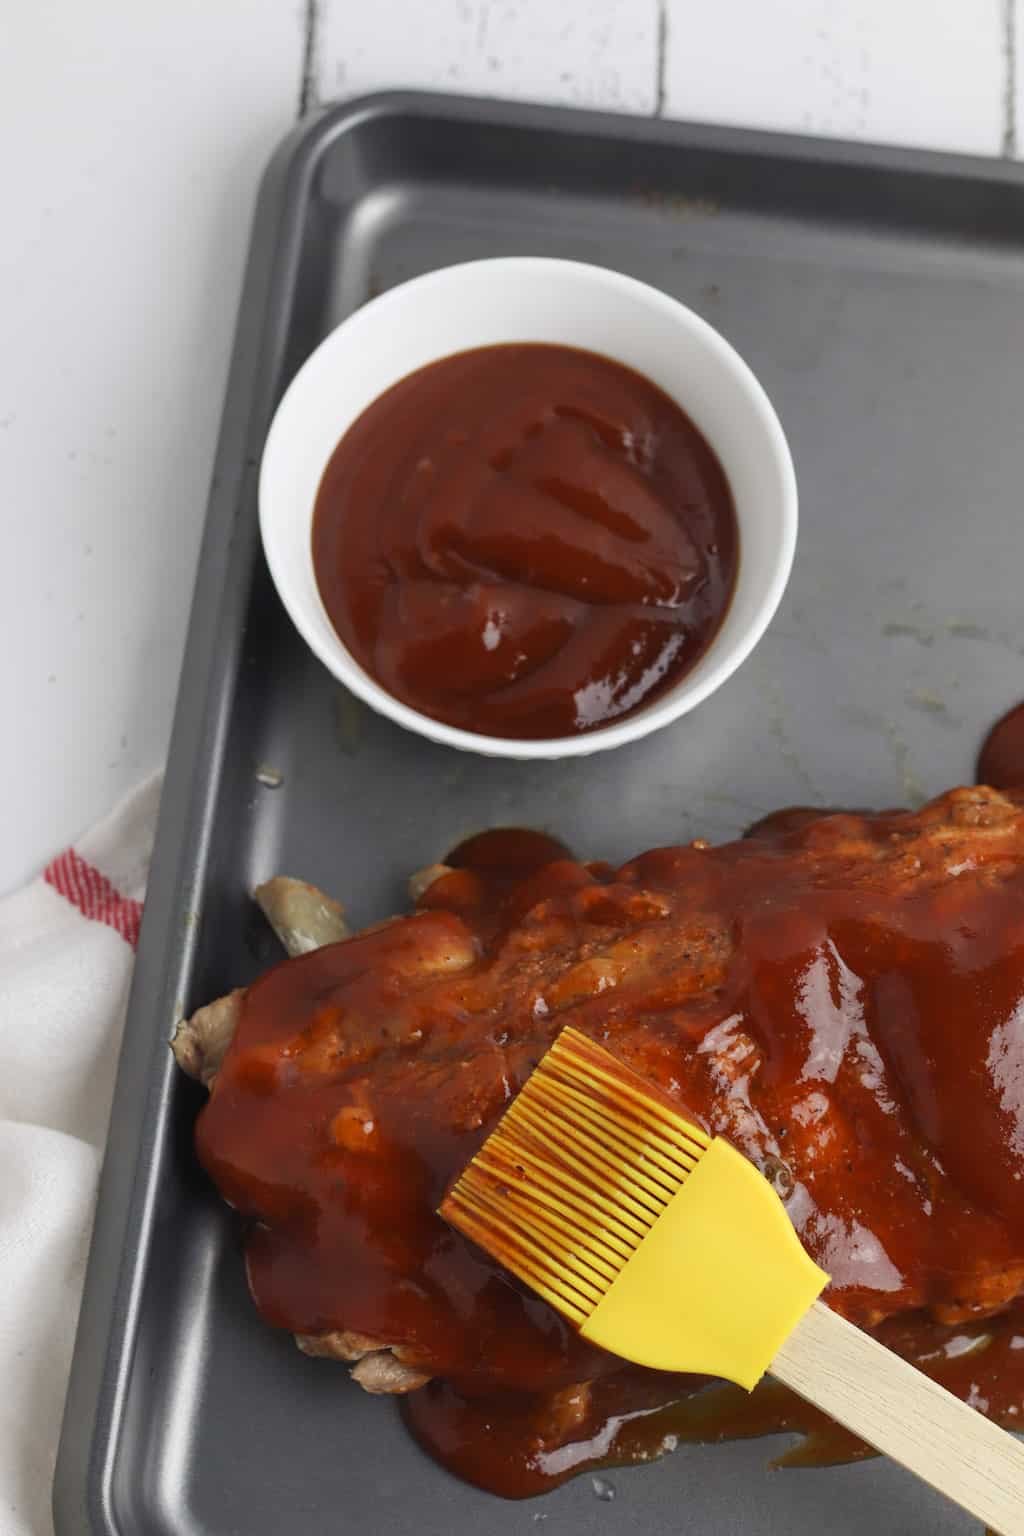 cover ribs with bbq sauce